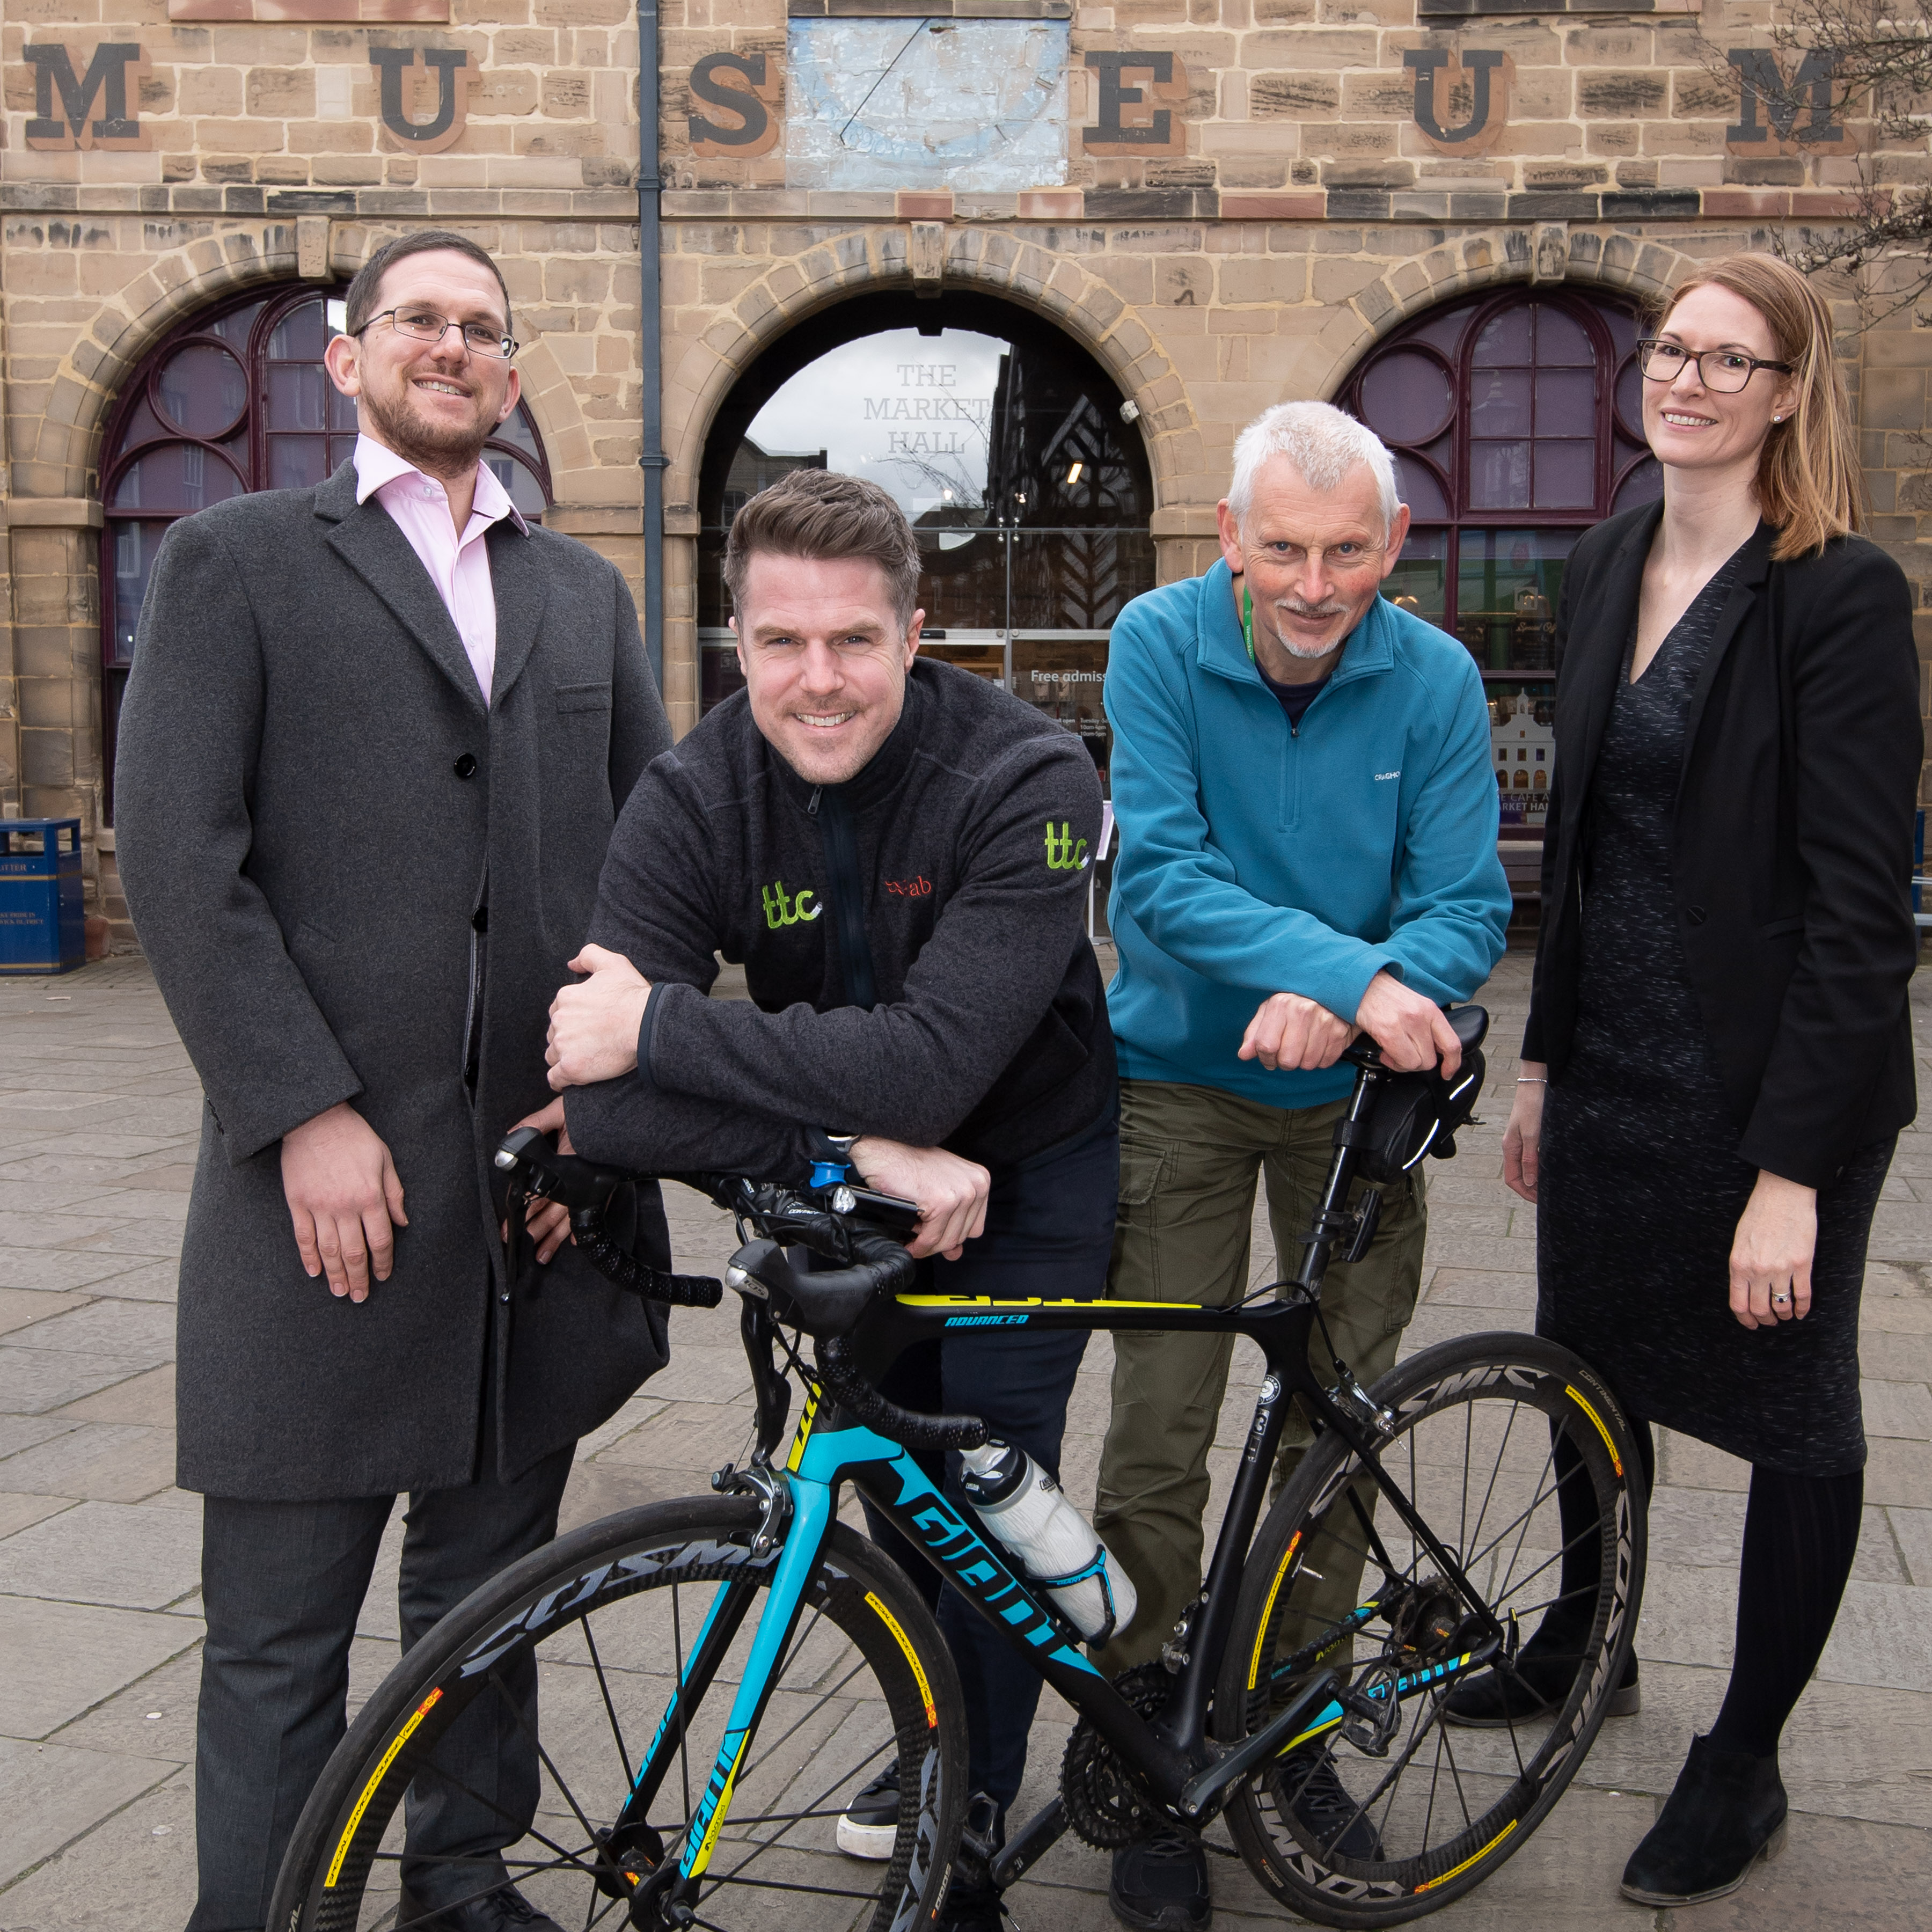 The Transportation Consultancy (ttc) named as sponsor for the ‘On yer bike! Our summer of cycling’ exhibition in Warwick